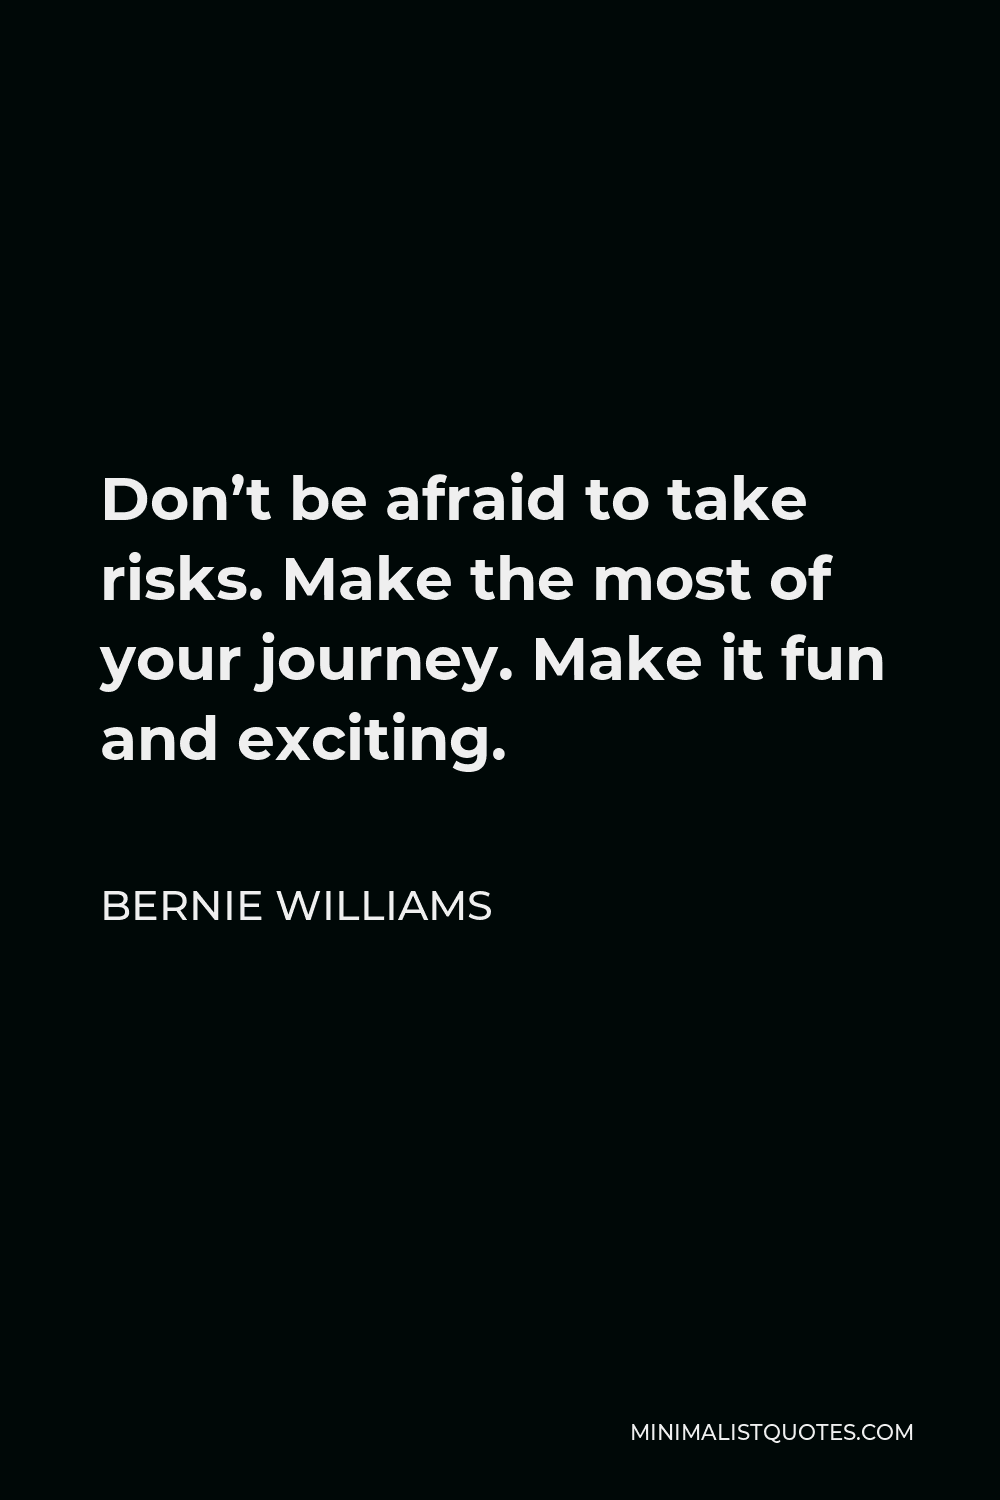 Bernie Williams Quote - Don’t be afraid to take risks. Make the most of your journey. Make it fun and exciting.